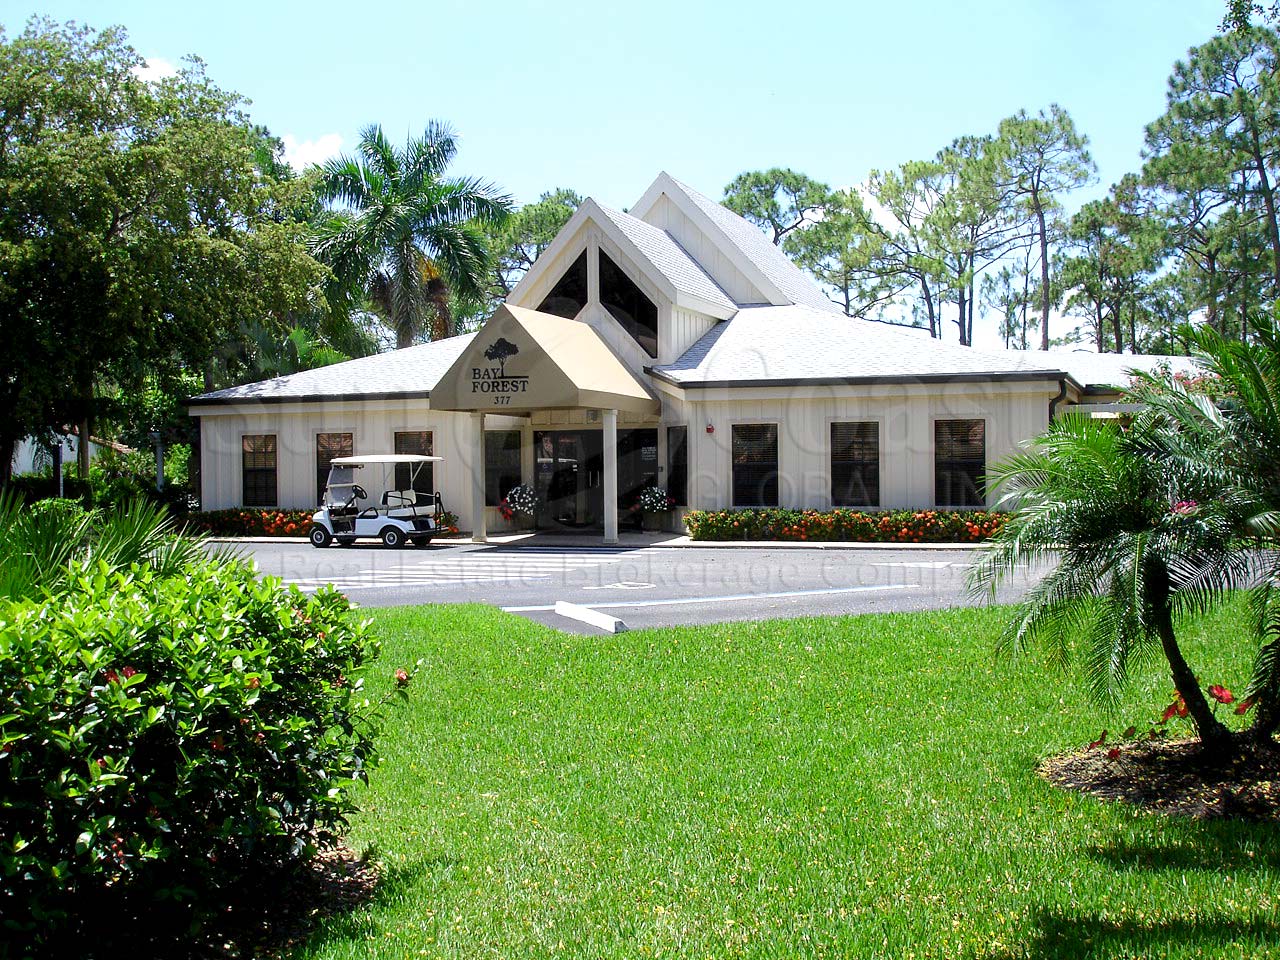 BAY FOREST Clubhouse